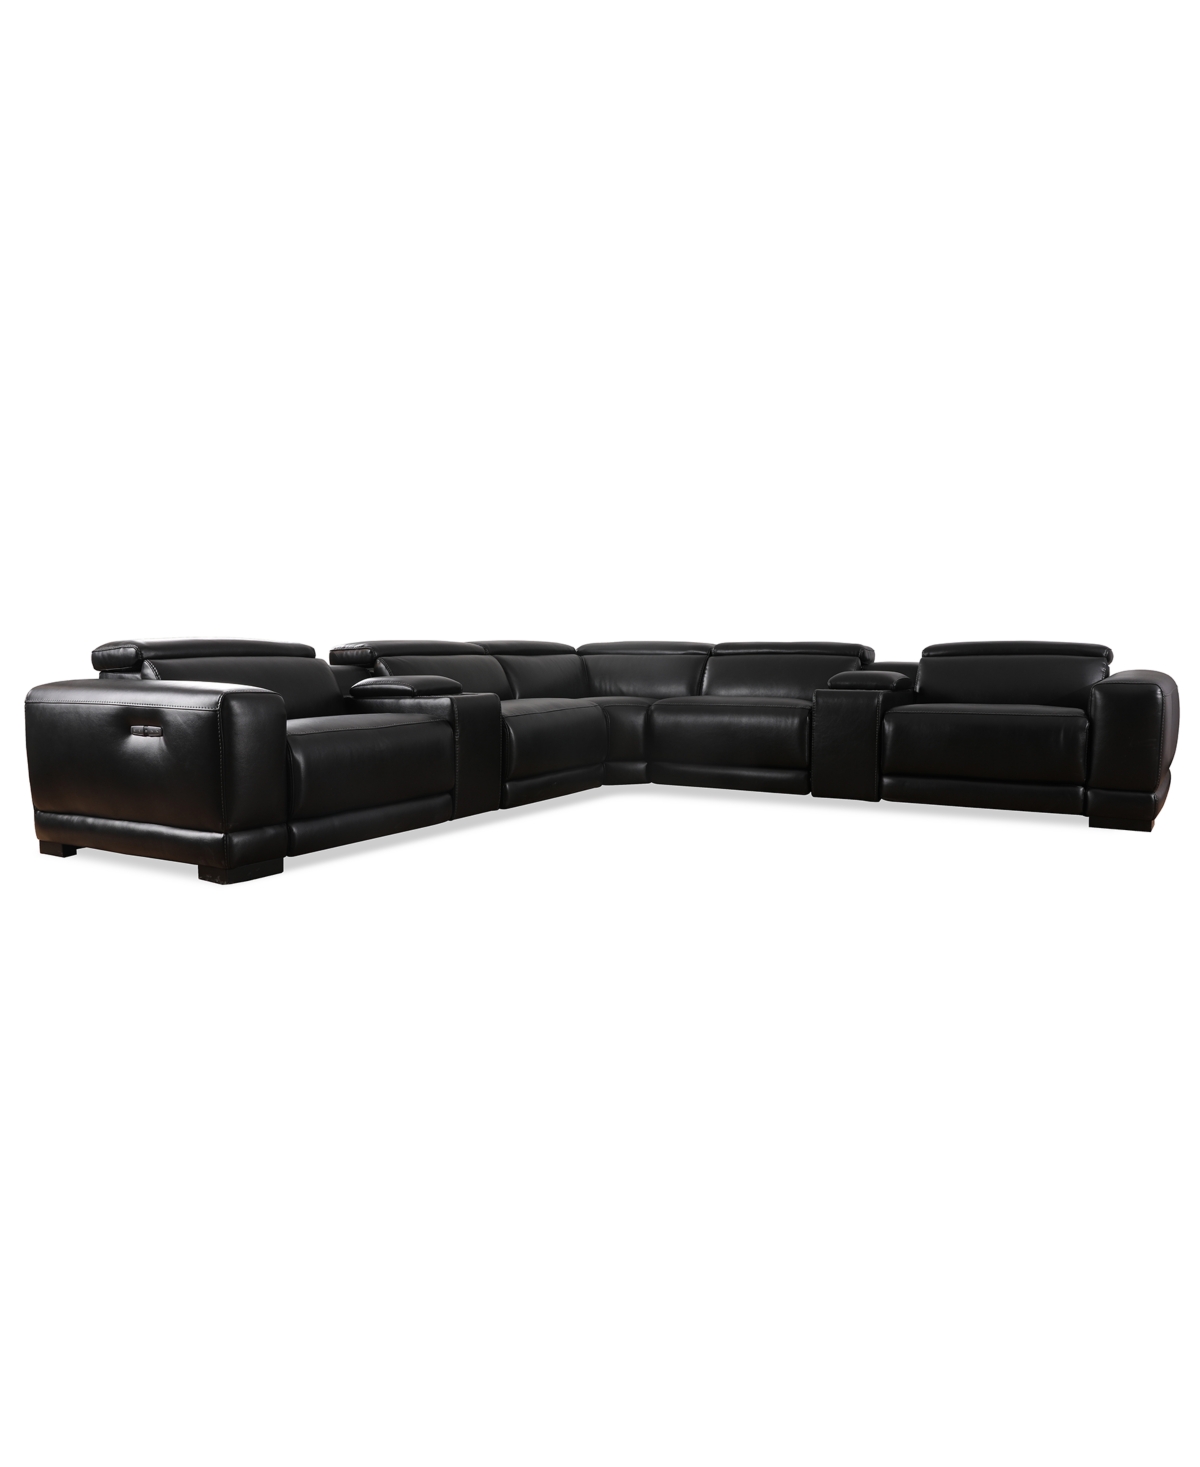 Furniture Krofton 7-pc. Beyond Leather Fabric Sectional With 3 Power Motion Recliners And 2 Consoles, Created In Blackberry